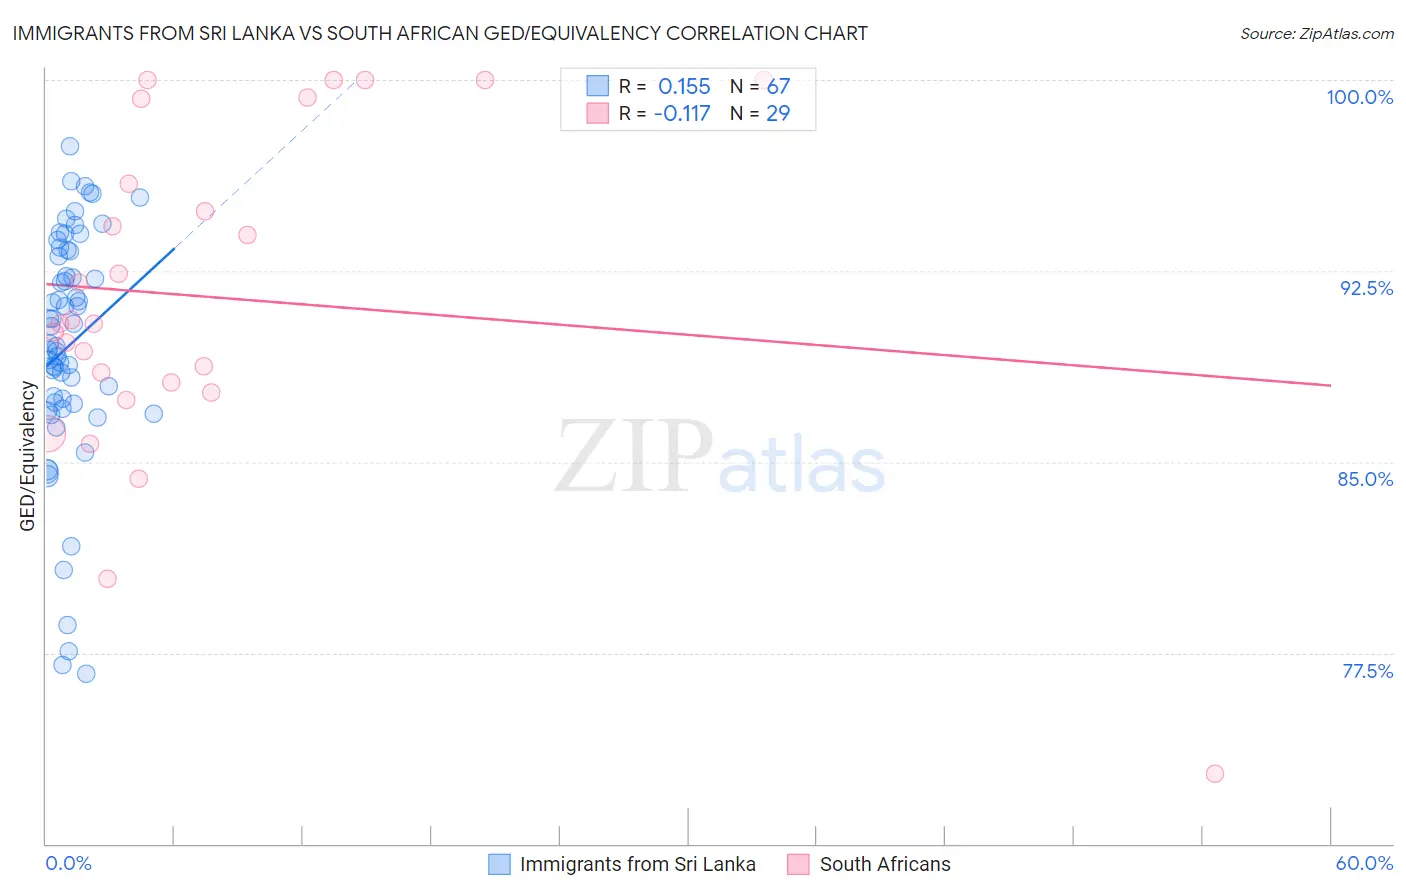 Immigrants from Sri Lanka vs South African GED/Equivalency